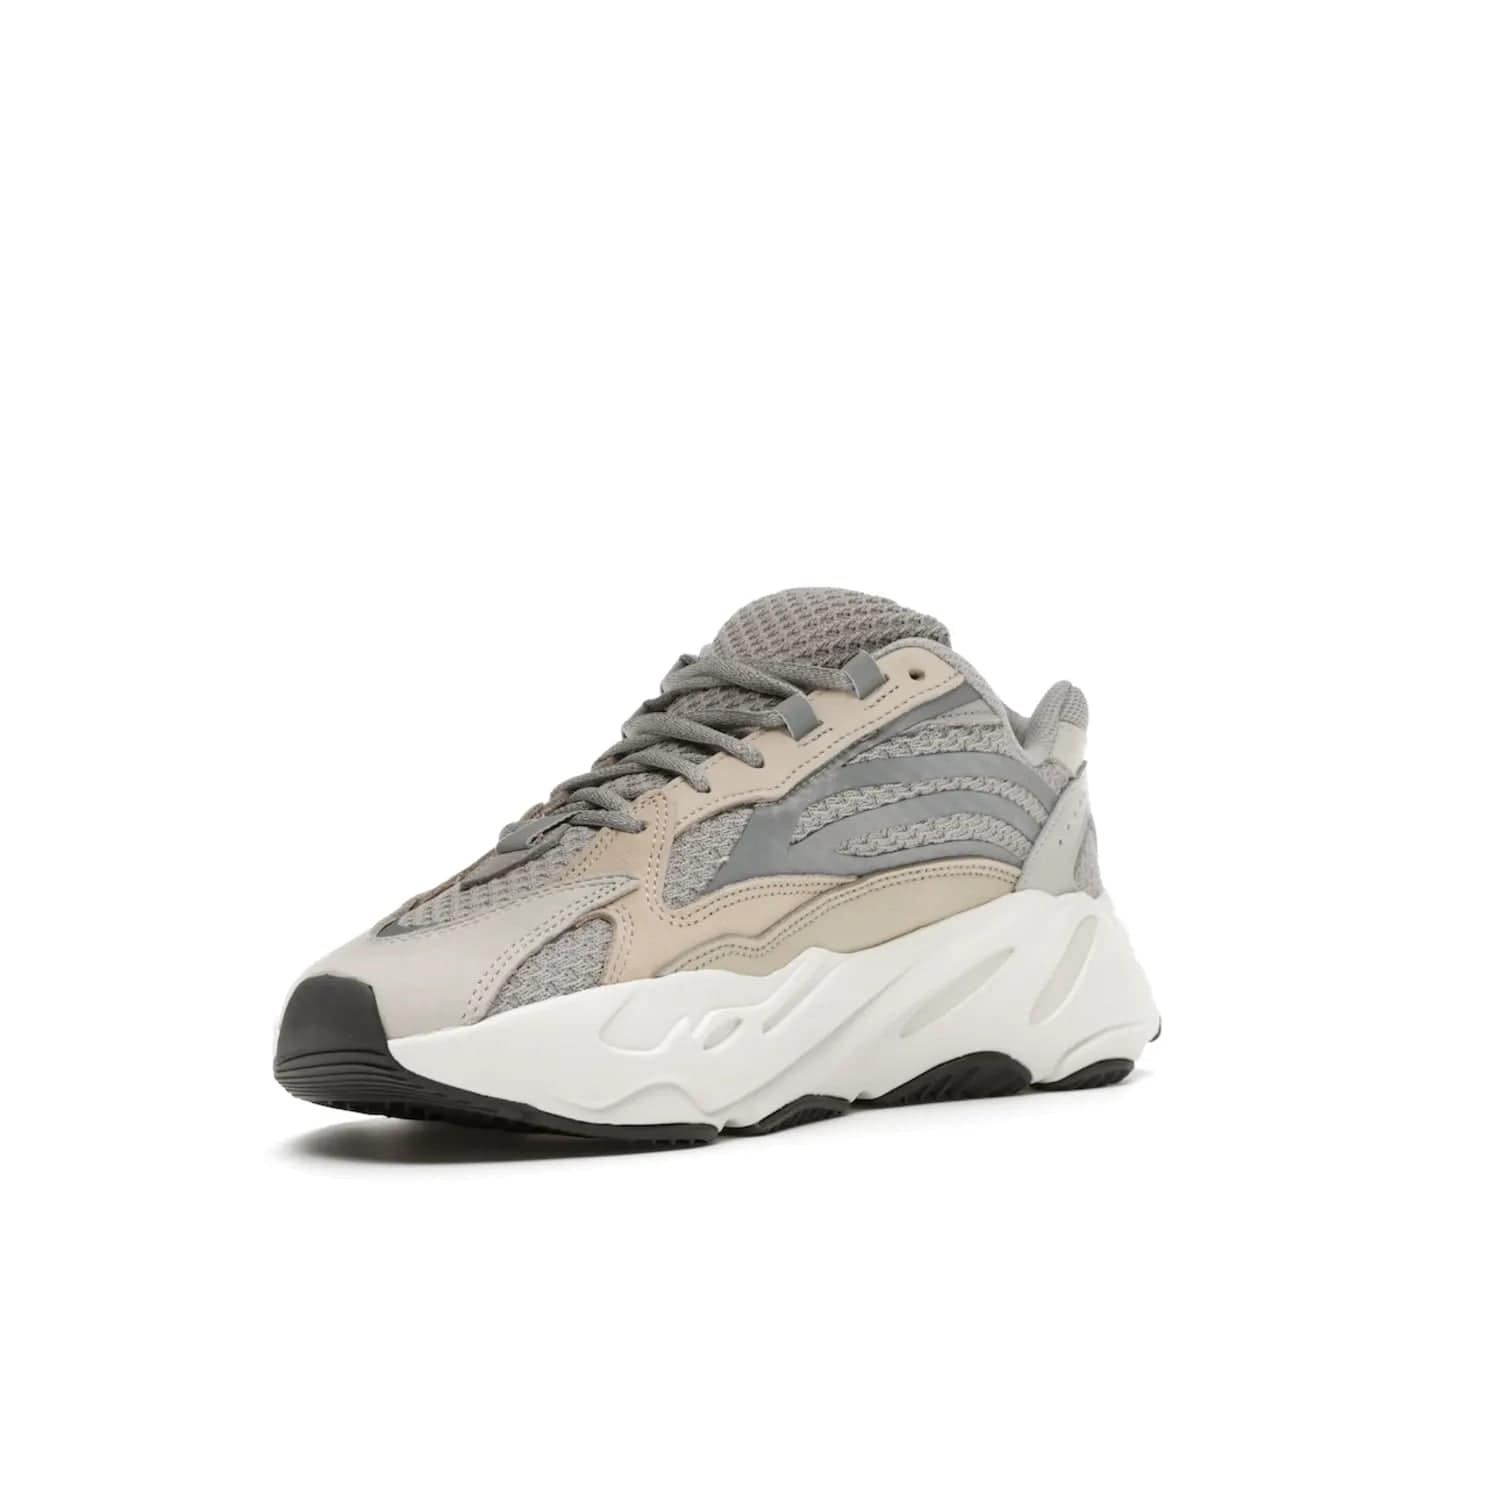 adidas Yeezy Boost 700 V2 Cream - Image 14 - Only at www.BallersClubKickz.com - Add style and luxury to your wardrobe with the adidas Yeezy 700 V2 Cream. Featuring a unique reflective upper, leather overlays, mesh underlays and the signature BOOST midsole, this silhouette is perfect for any stylish wardrobe.